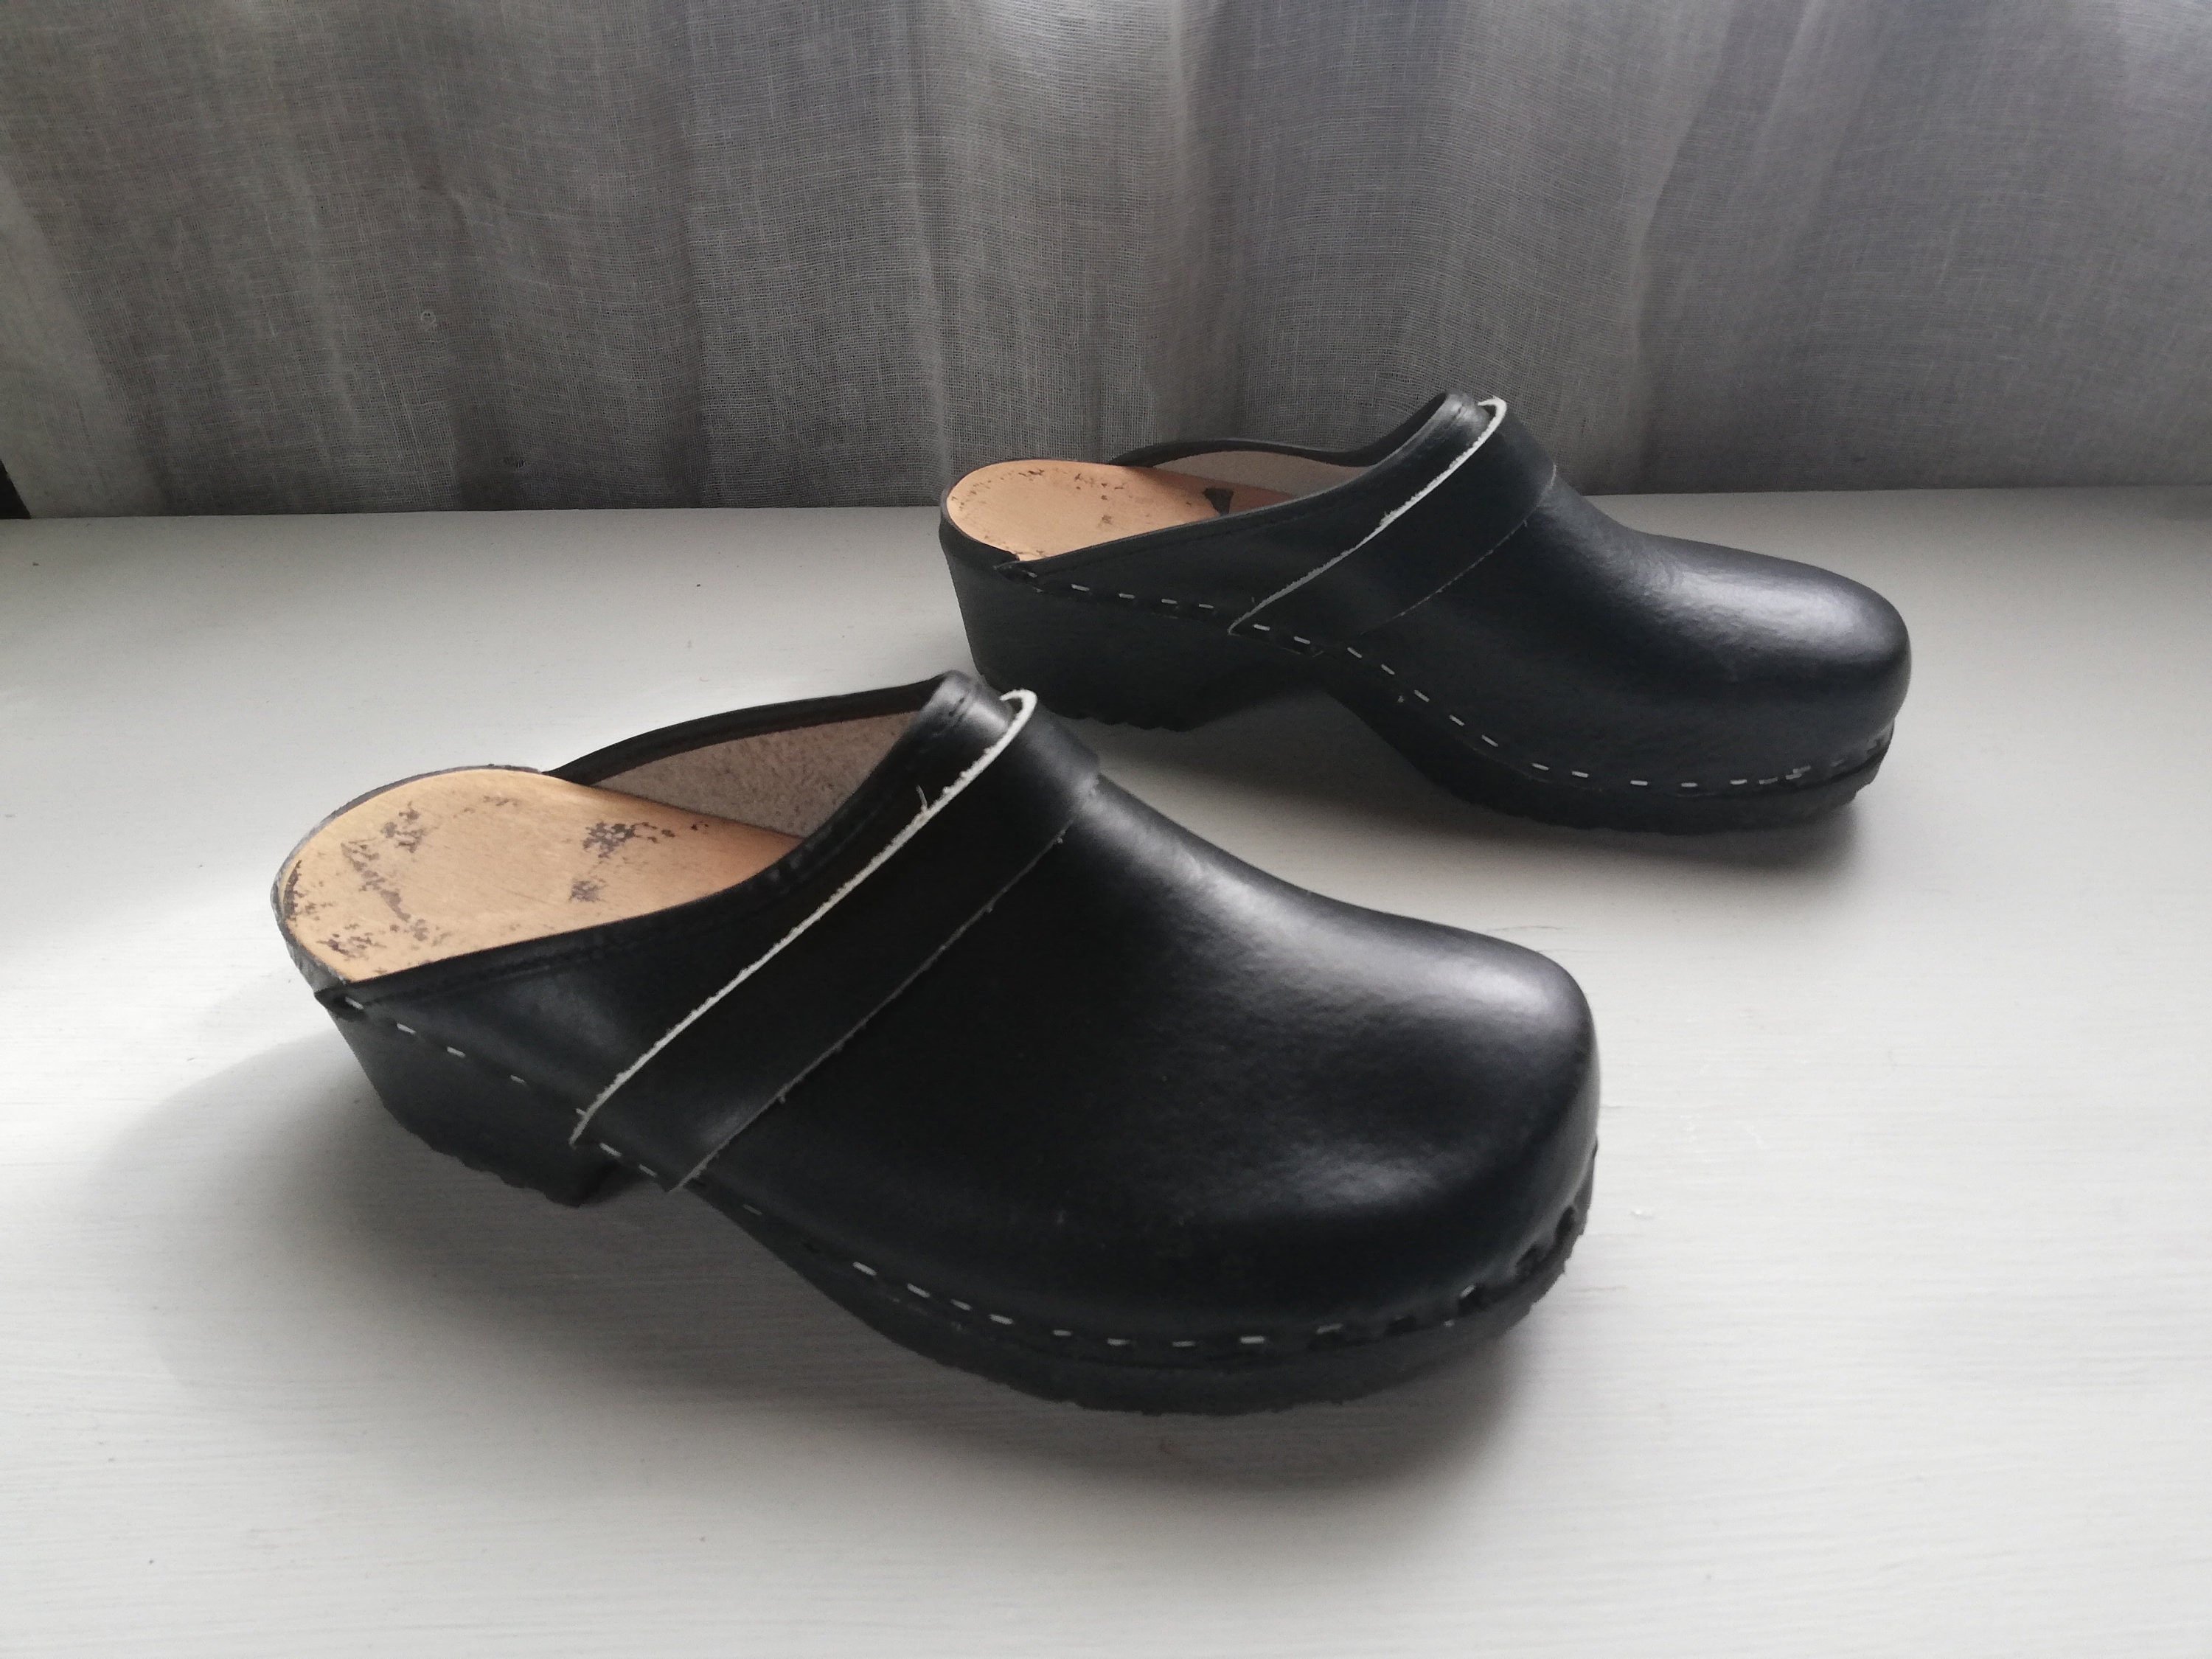 Wooden Clogs Size 9